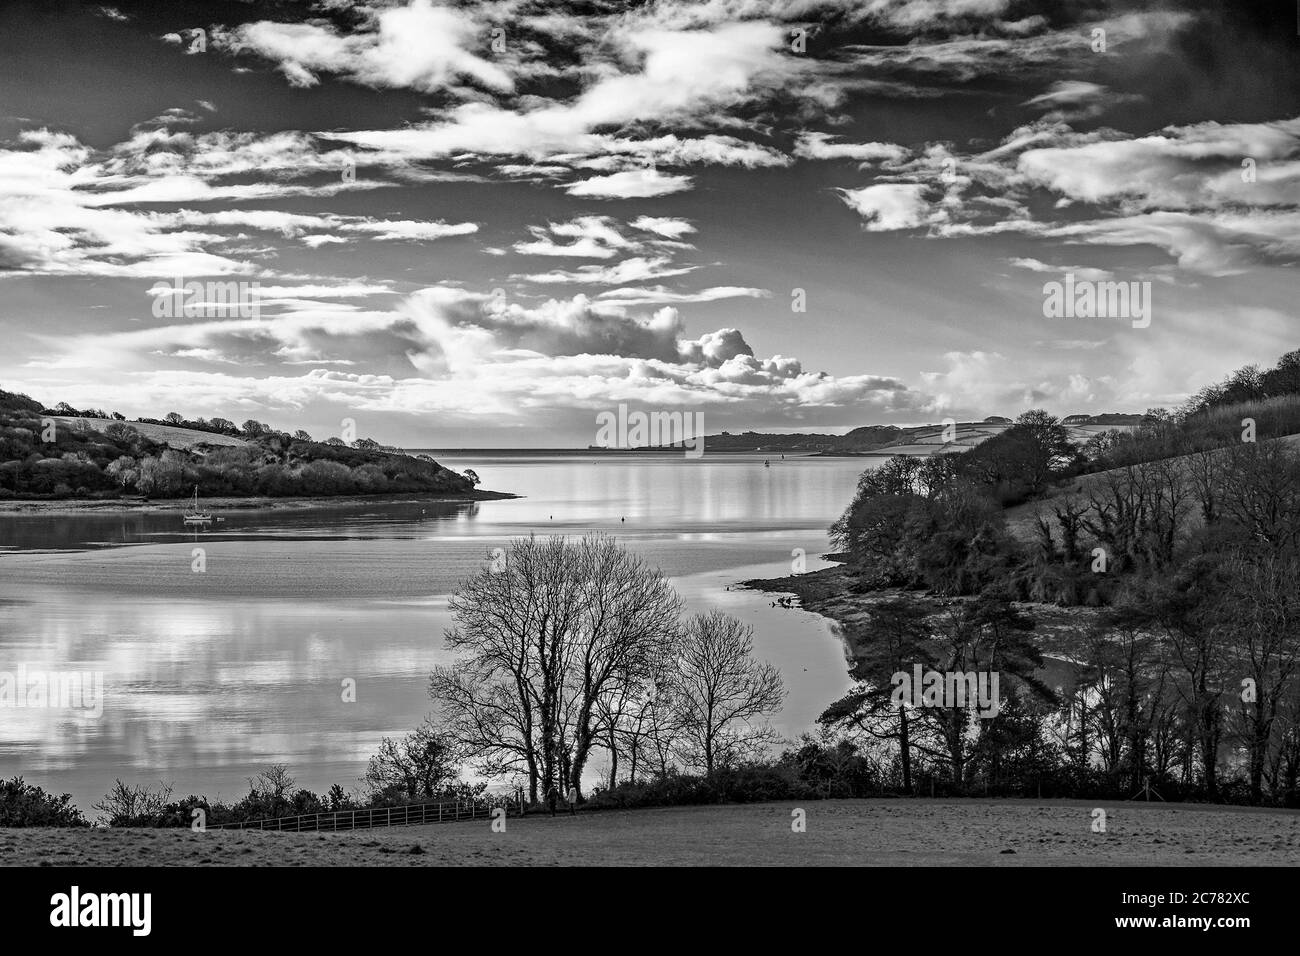 view over the carrick roads estuary on the river fal in cornwall, england. Stock Photo